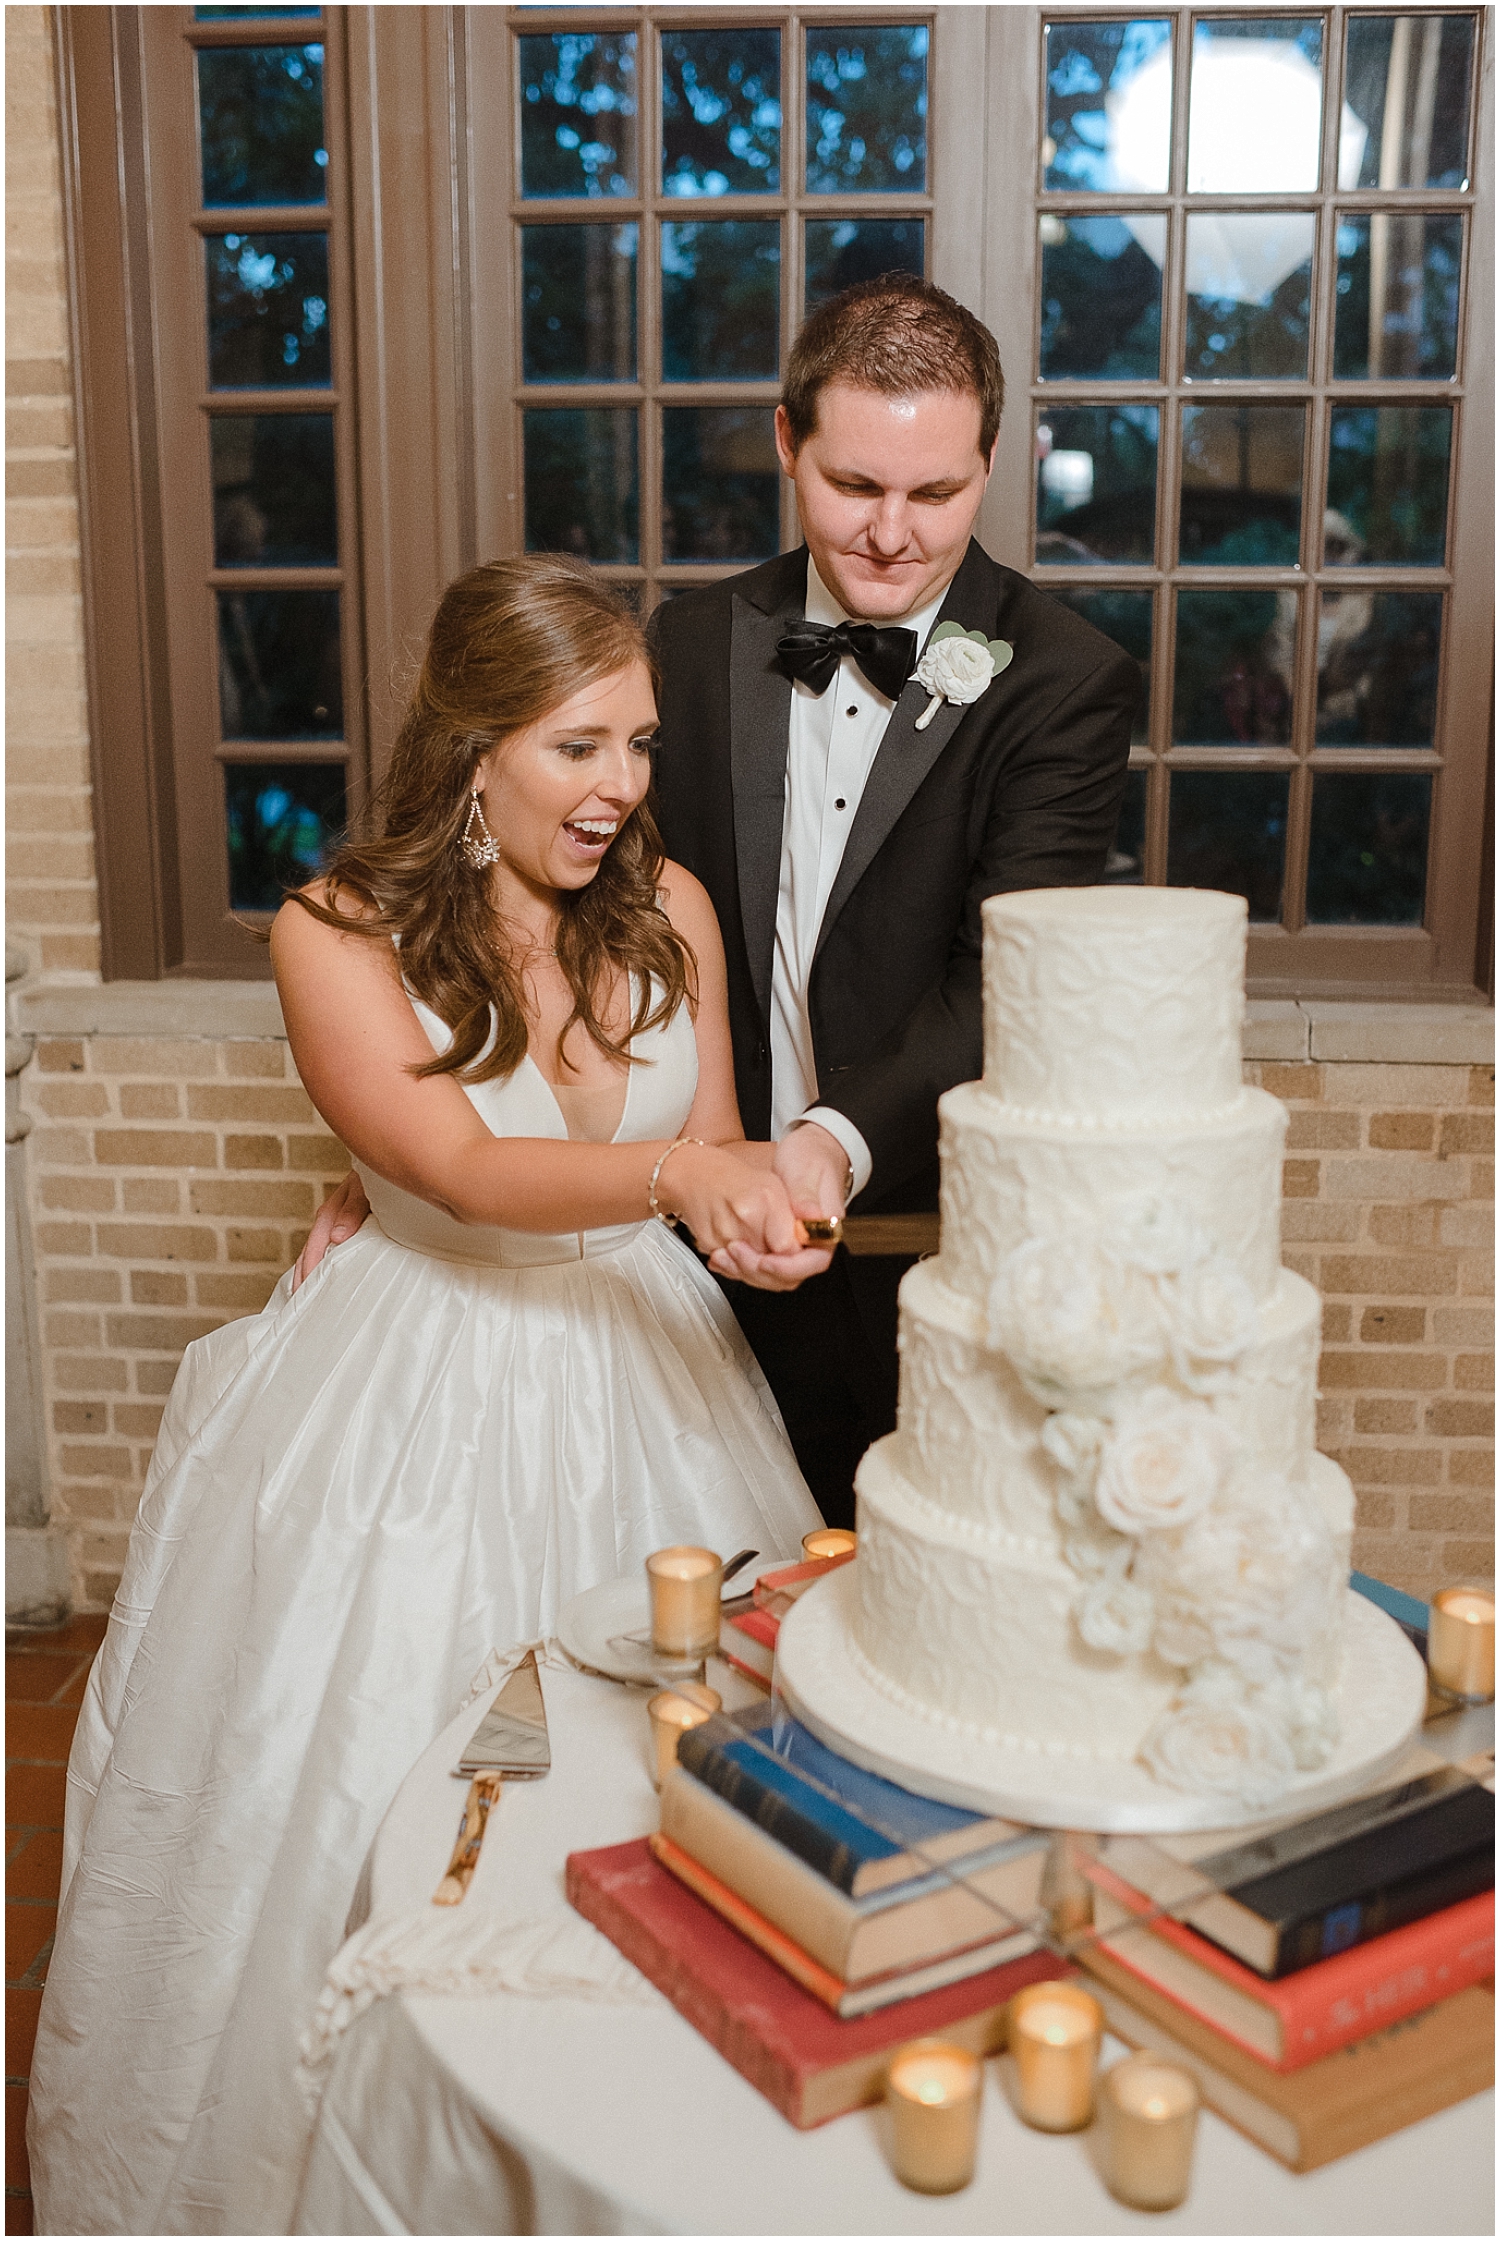  the bride and groom cut their wedding cake 